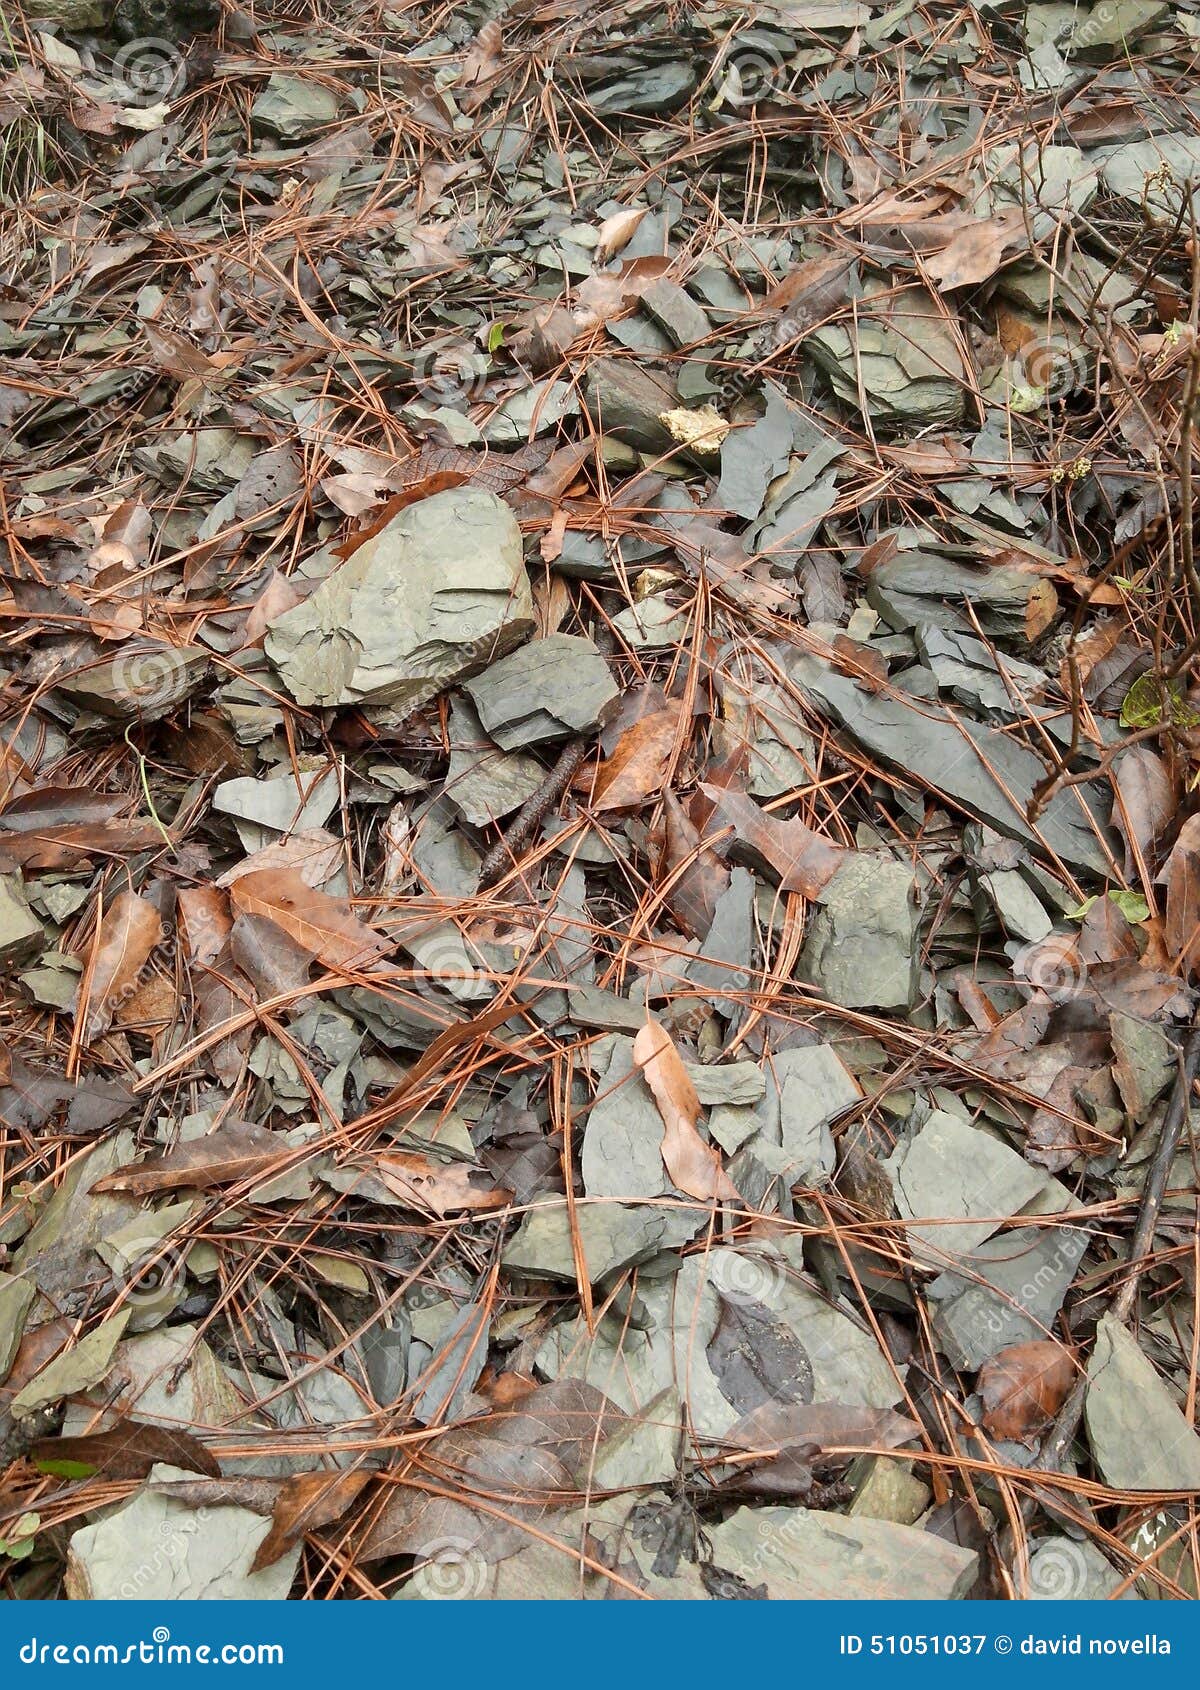 rocks and leafs